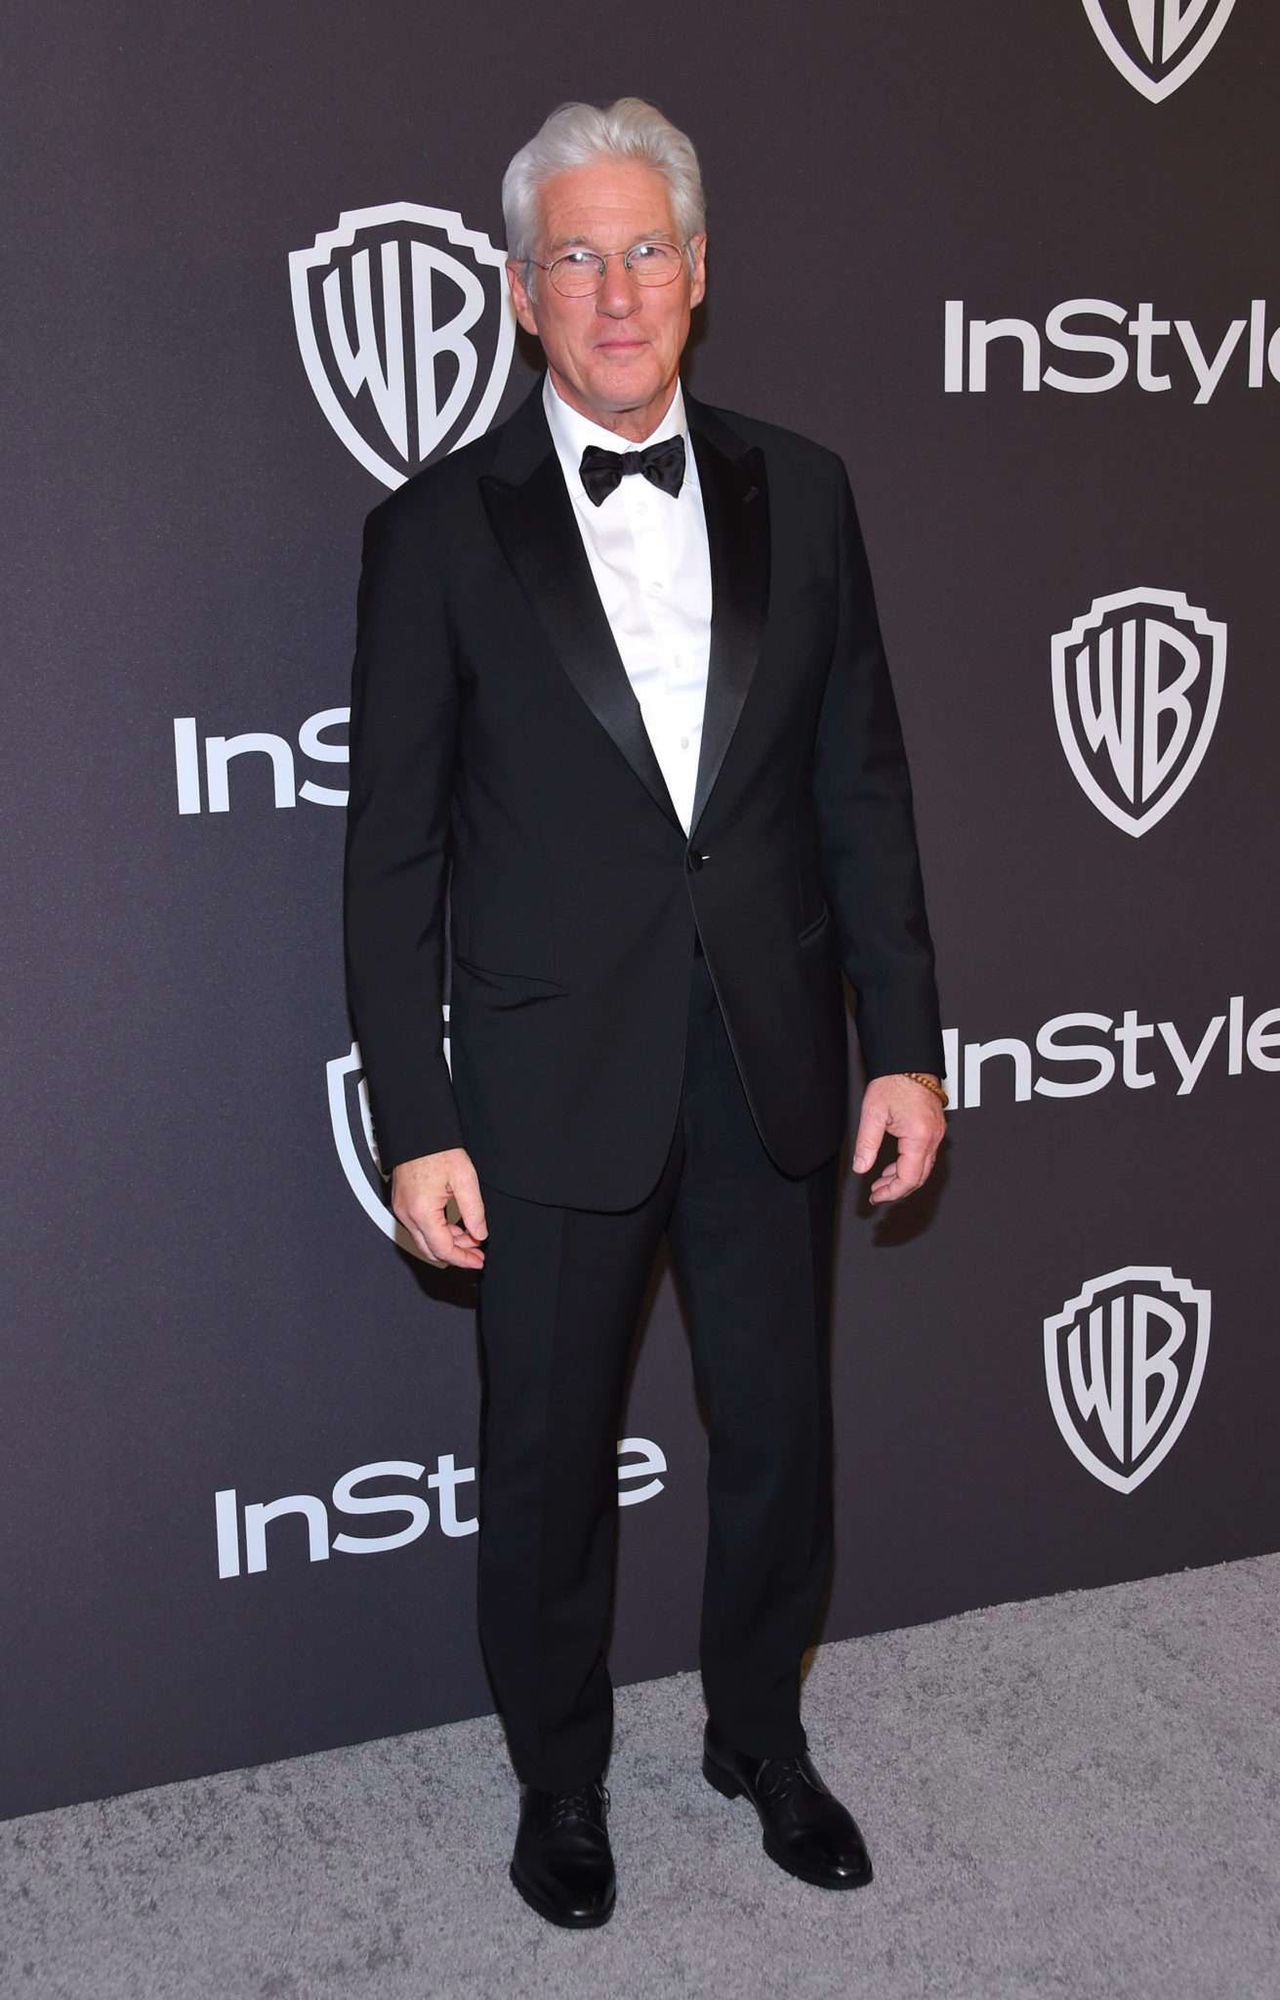 Richard Gere - Złote Globy 2019 after party InStyle